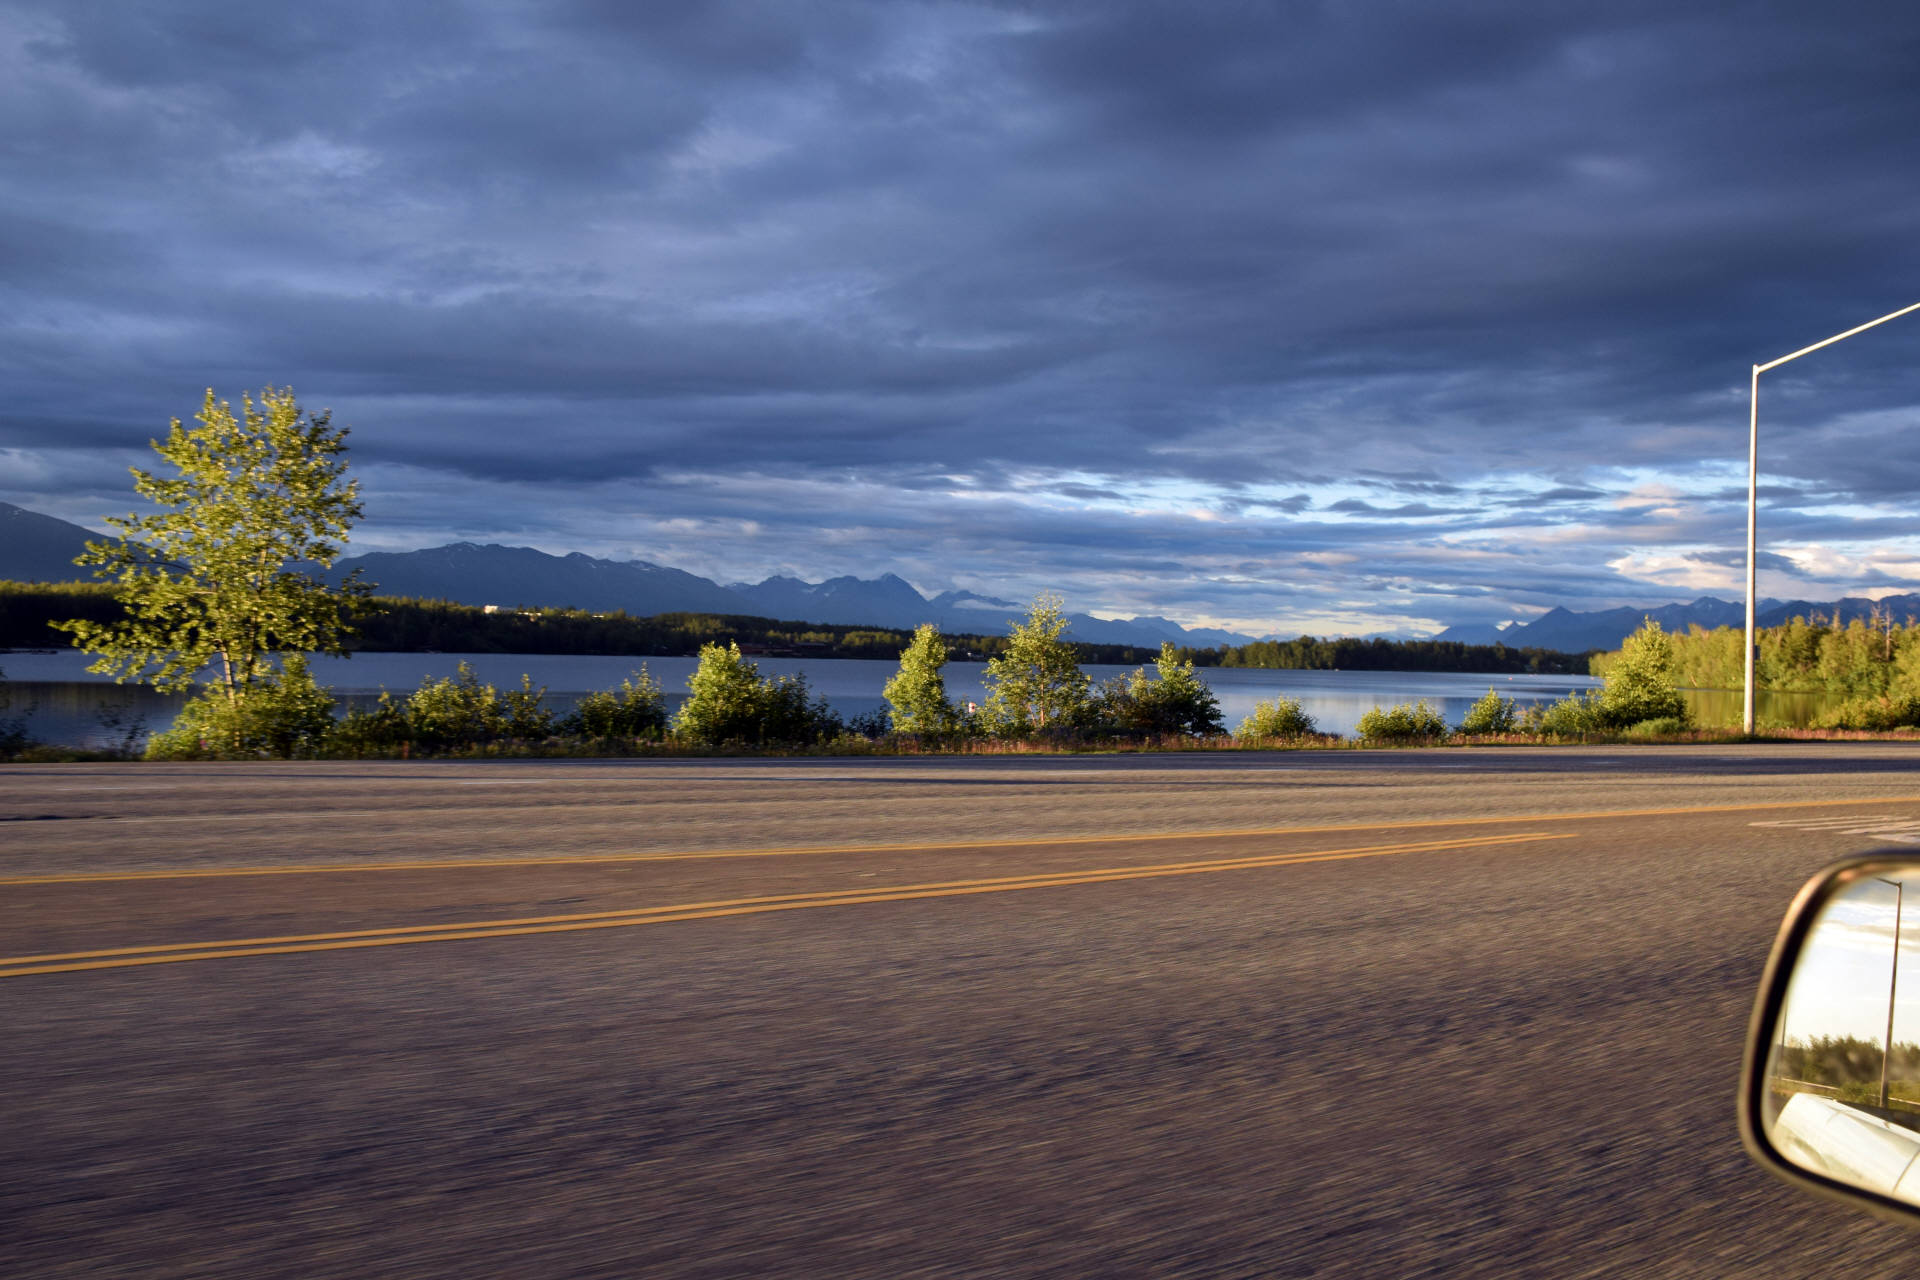 View to Alaska Range and Wasilla lake from Parks Highway in Wasilla, Alaska, on sunset. Photo: Fyodor Soloview.